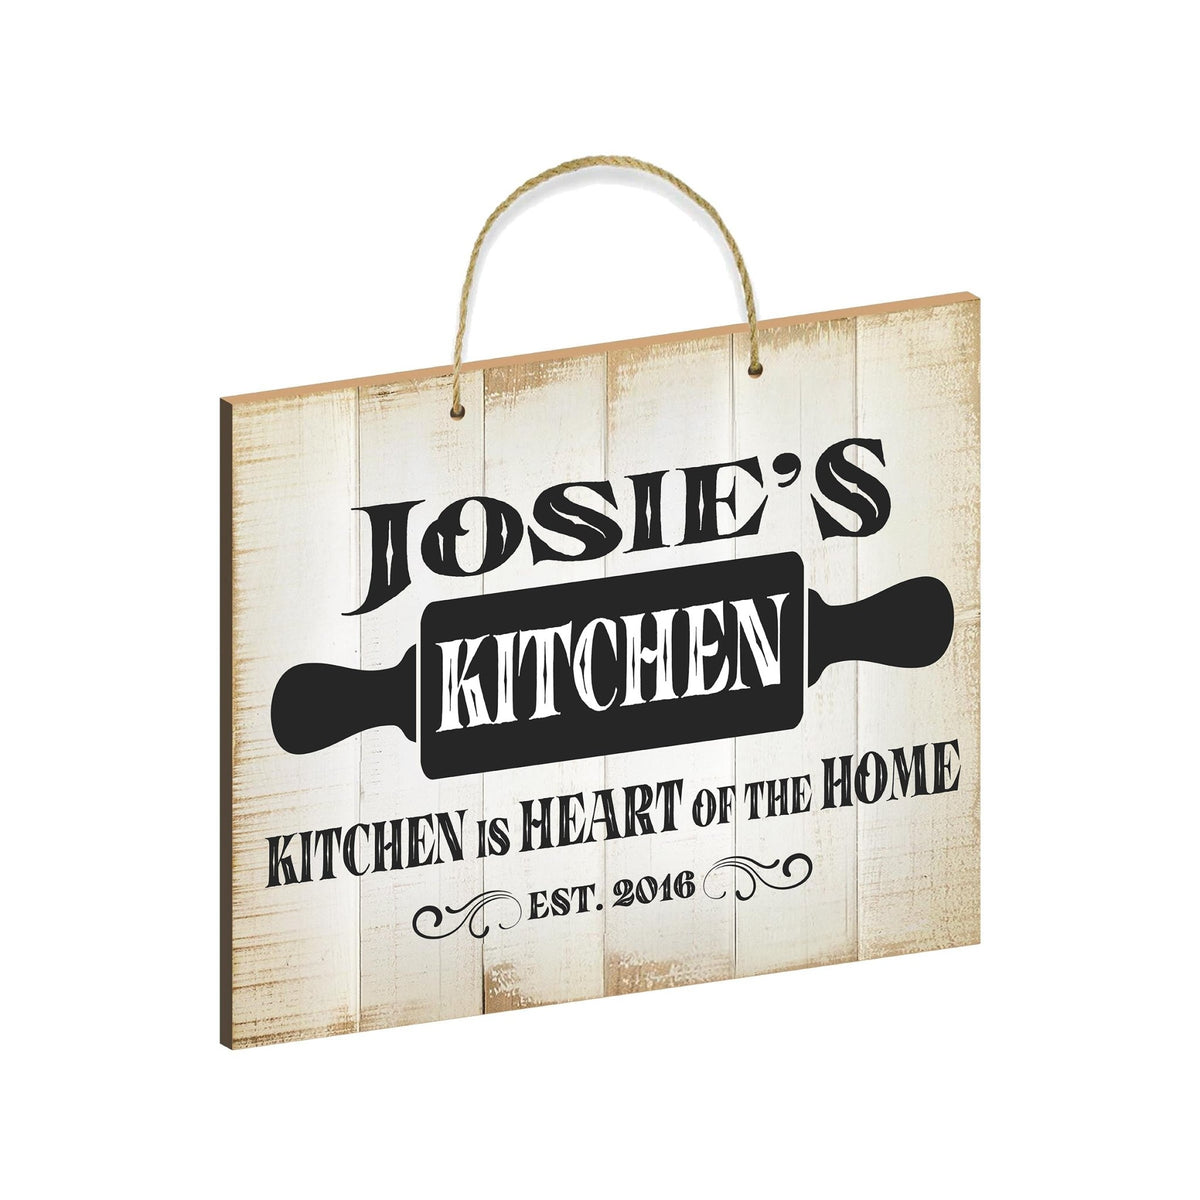 Rustic-Inspired Wooden Wall Hanging Rope Sign For Kitchen &amp; Home Décor - Kitchen Is Heart 2